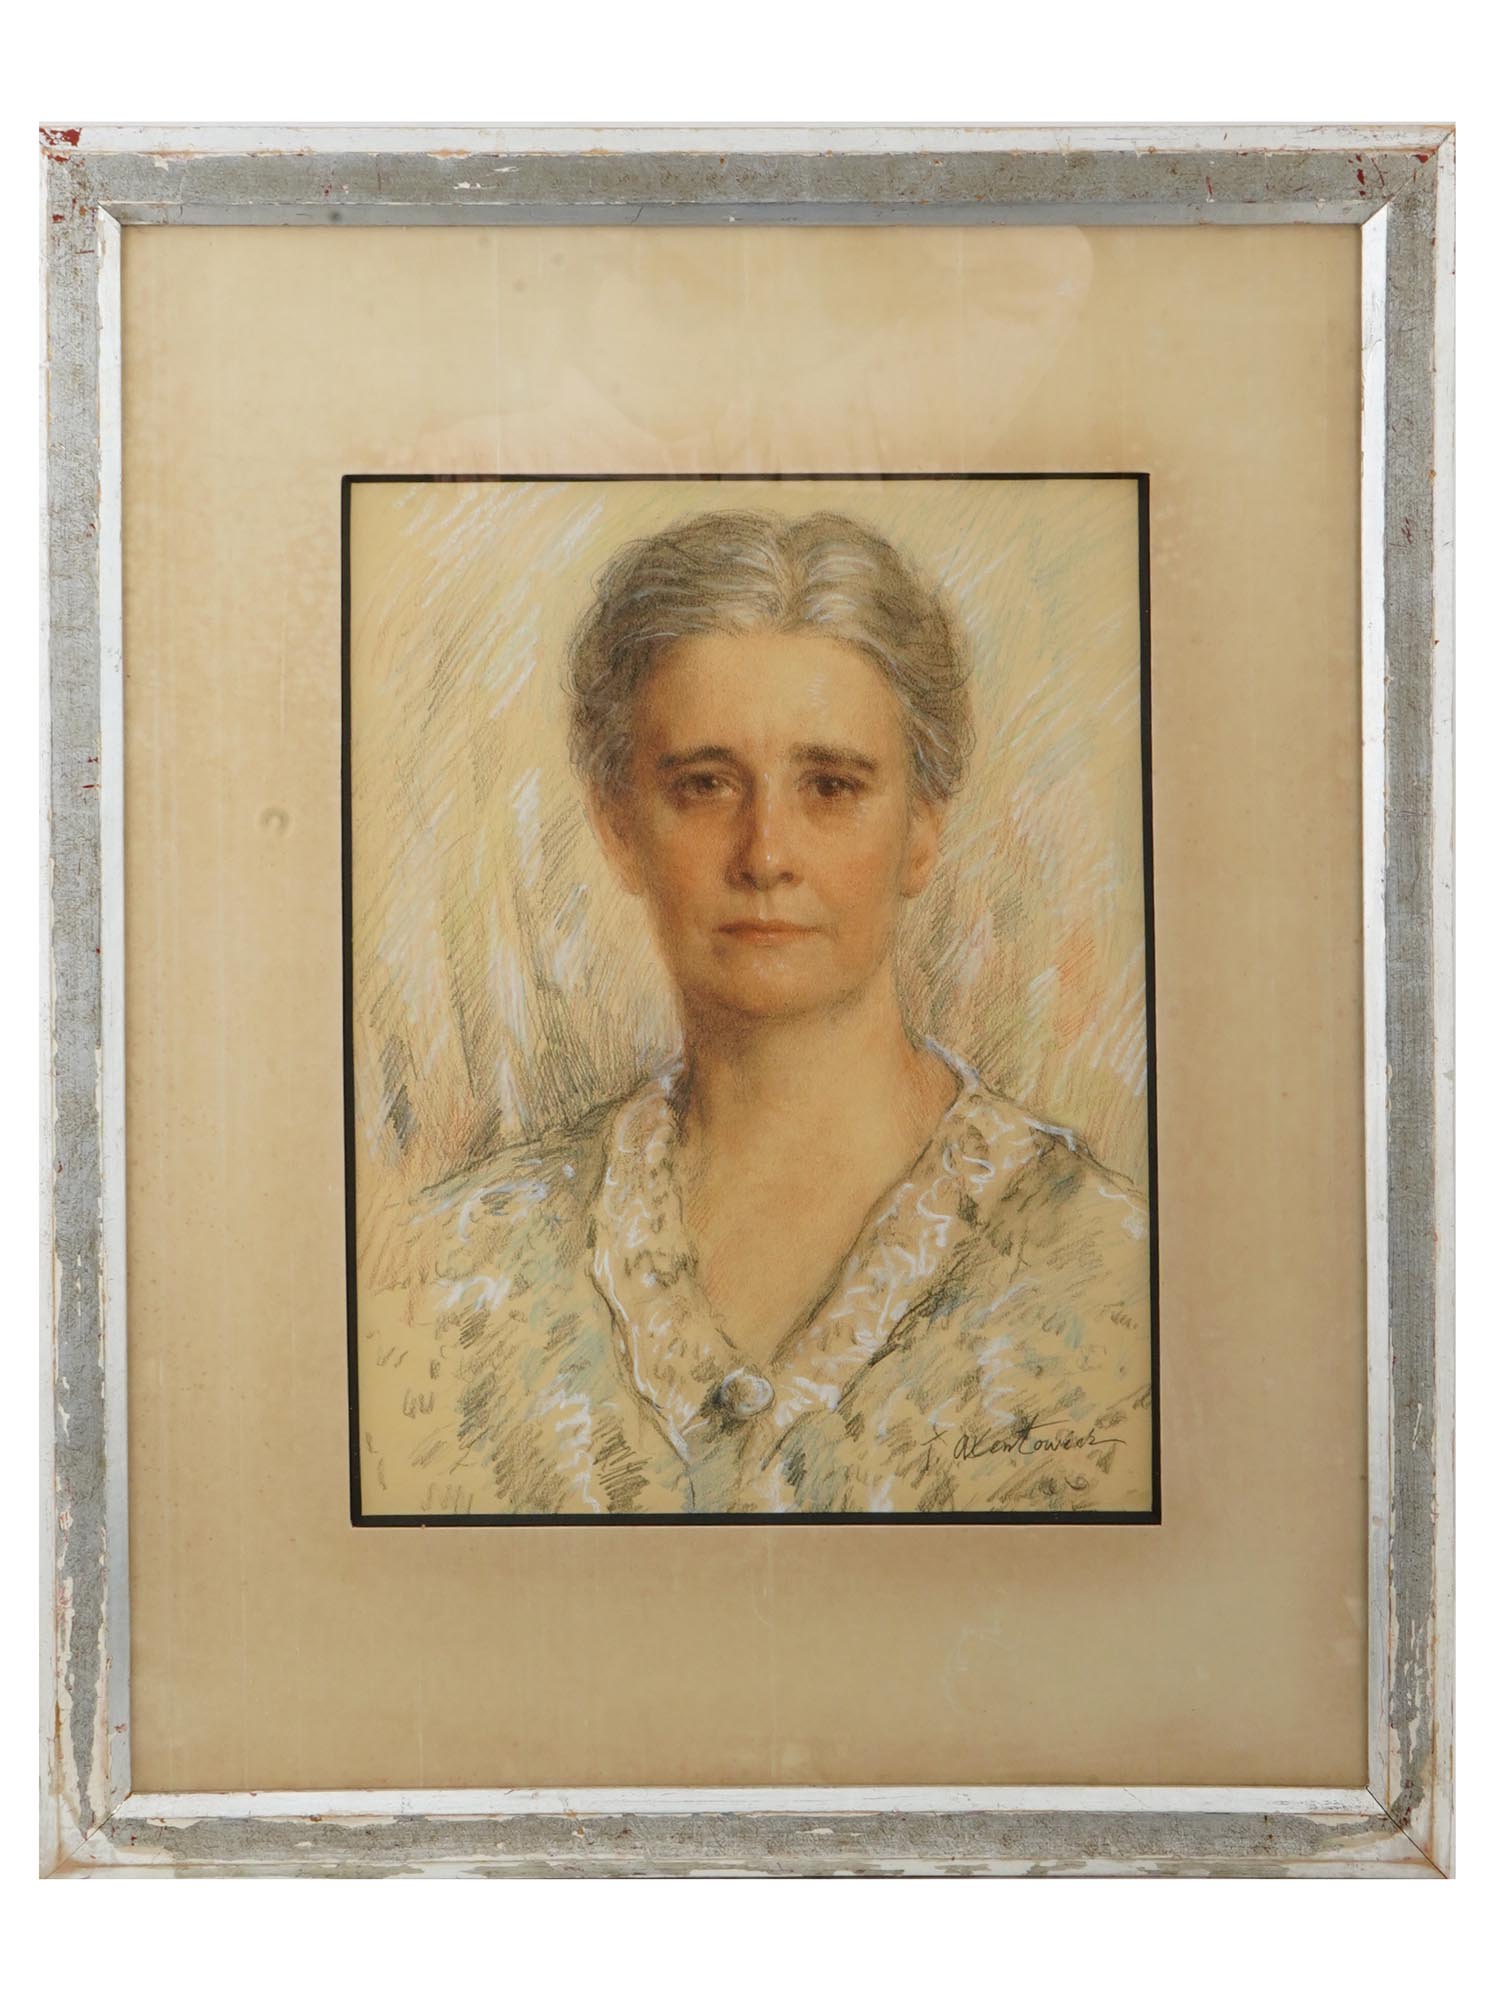 POLISH PASTEL PORTRAIT DRAWING BY TEODOR AXENTOWICZ PIC-0